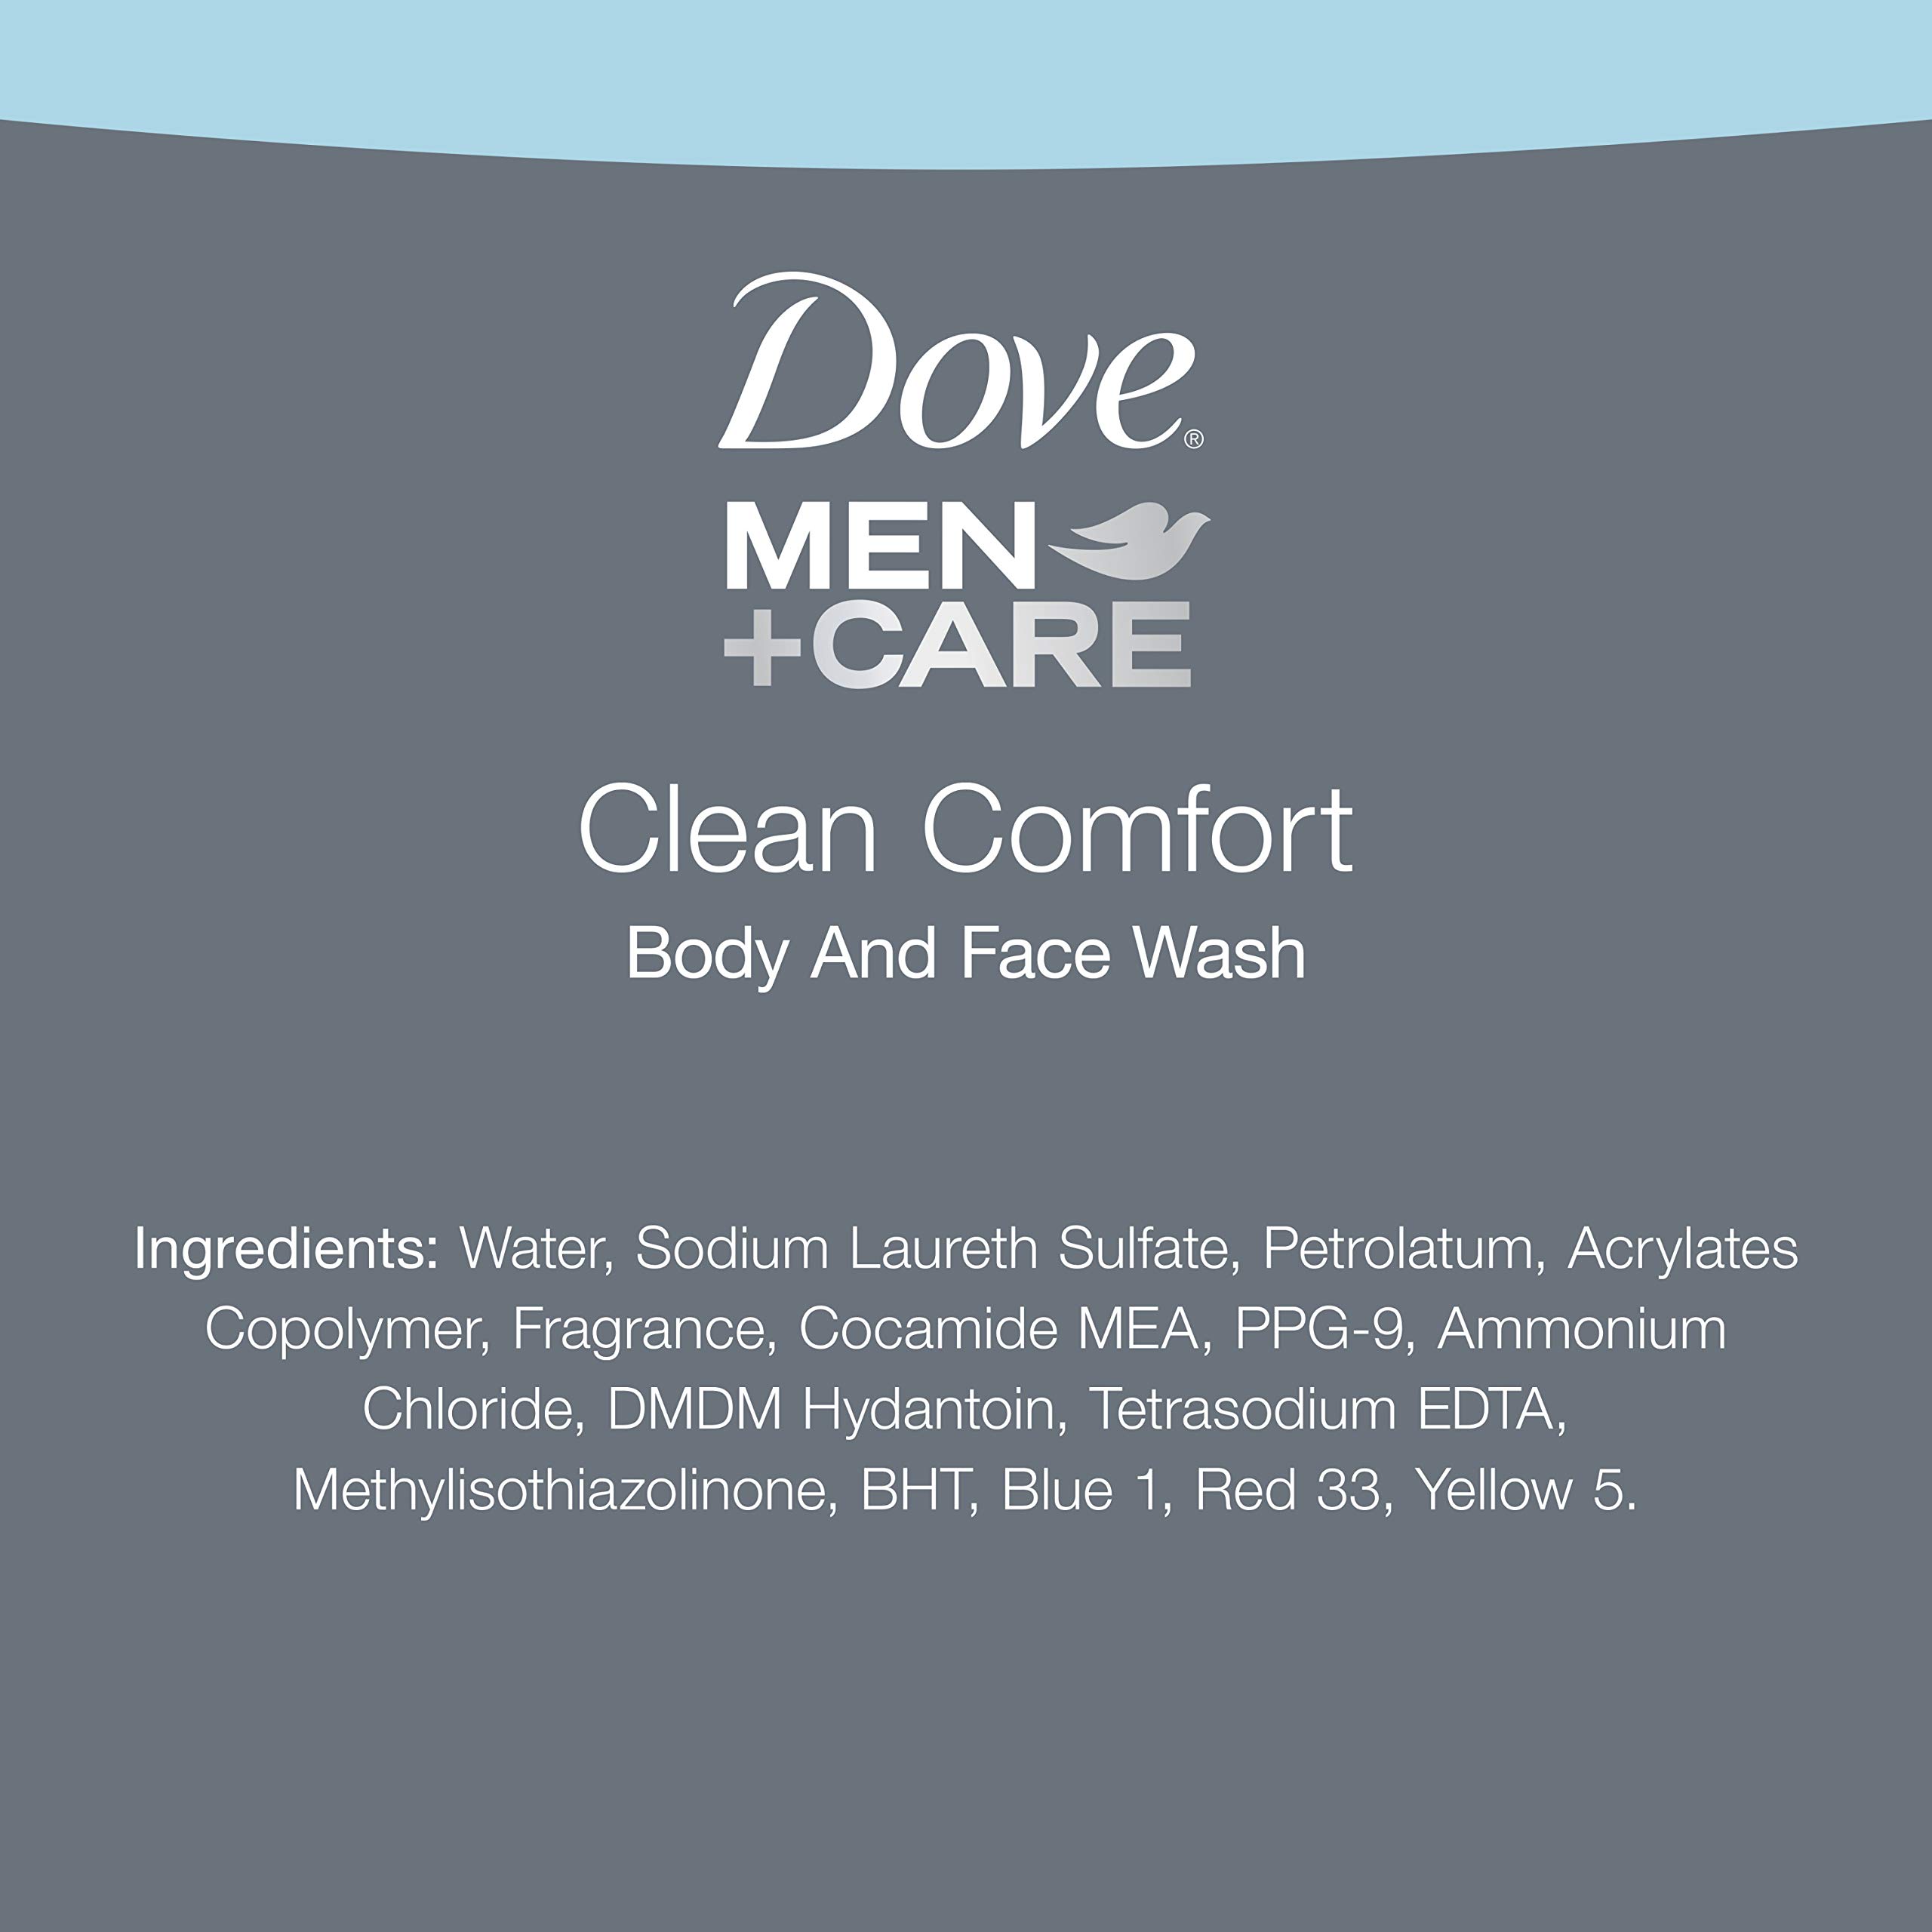 Dove Men+Care Body and Face Wash Clean Comfort 4 Count for Healthier and Stronger Skin Effectively Washes Away Bacteria While Nourishing Your Skin, 18 oz